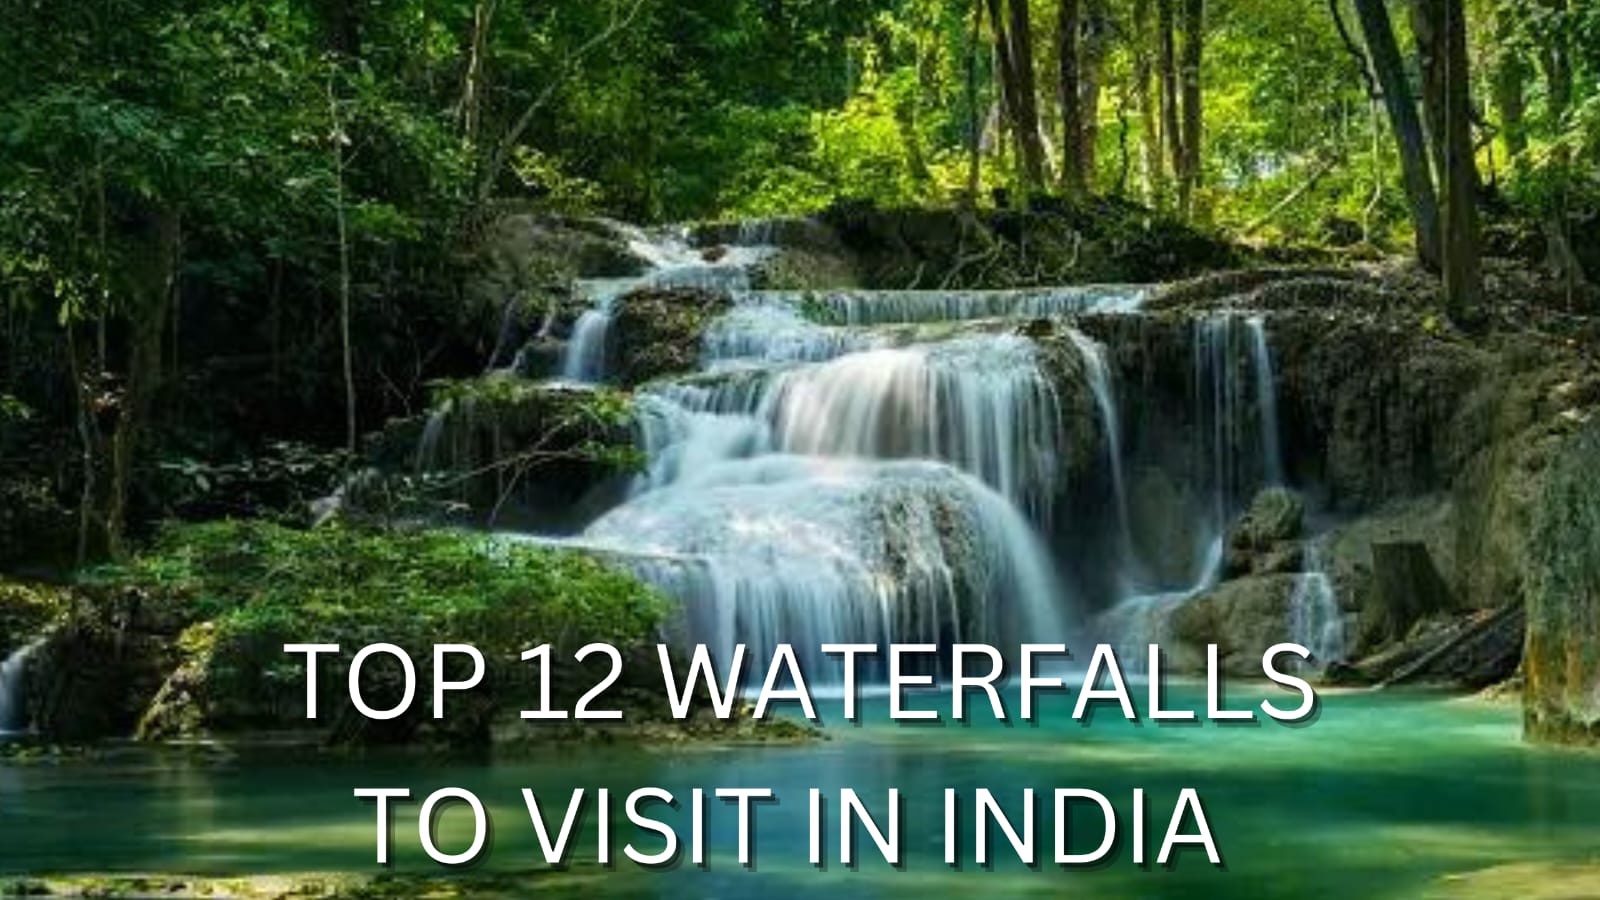 TOP 12 WATERFALL TO VISIT IN INDIA